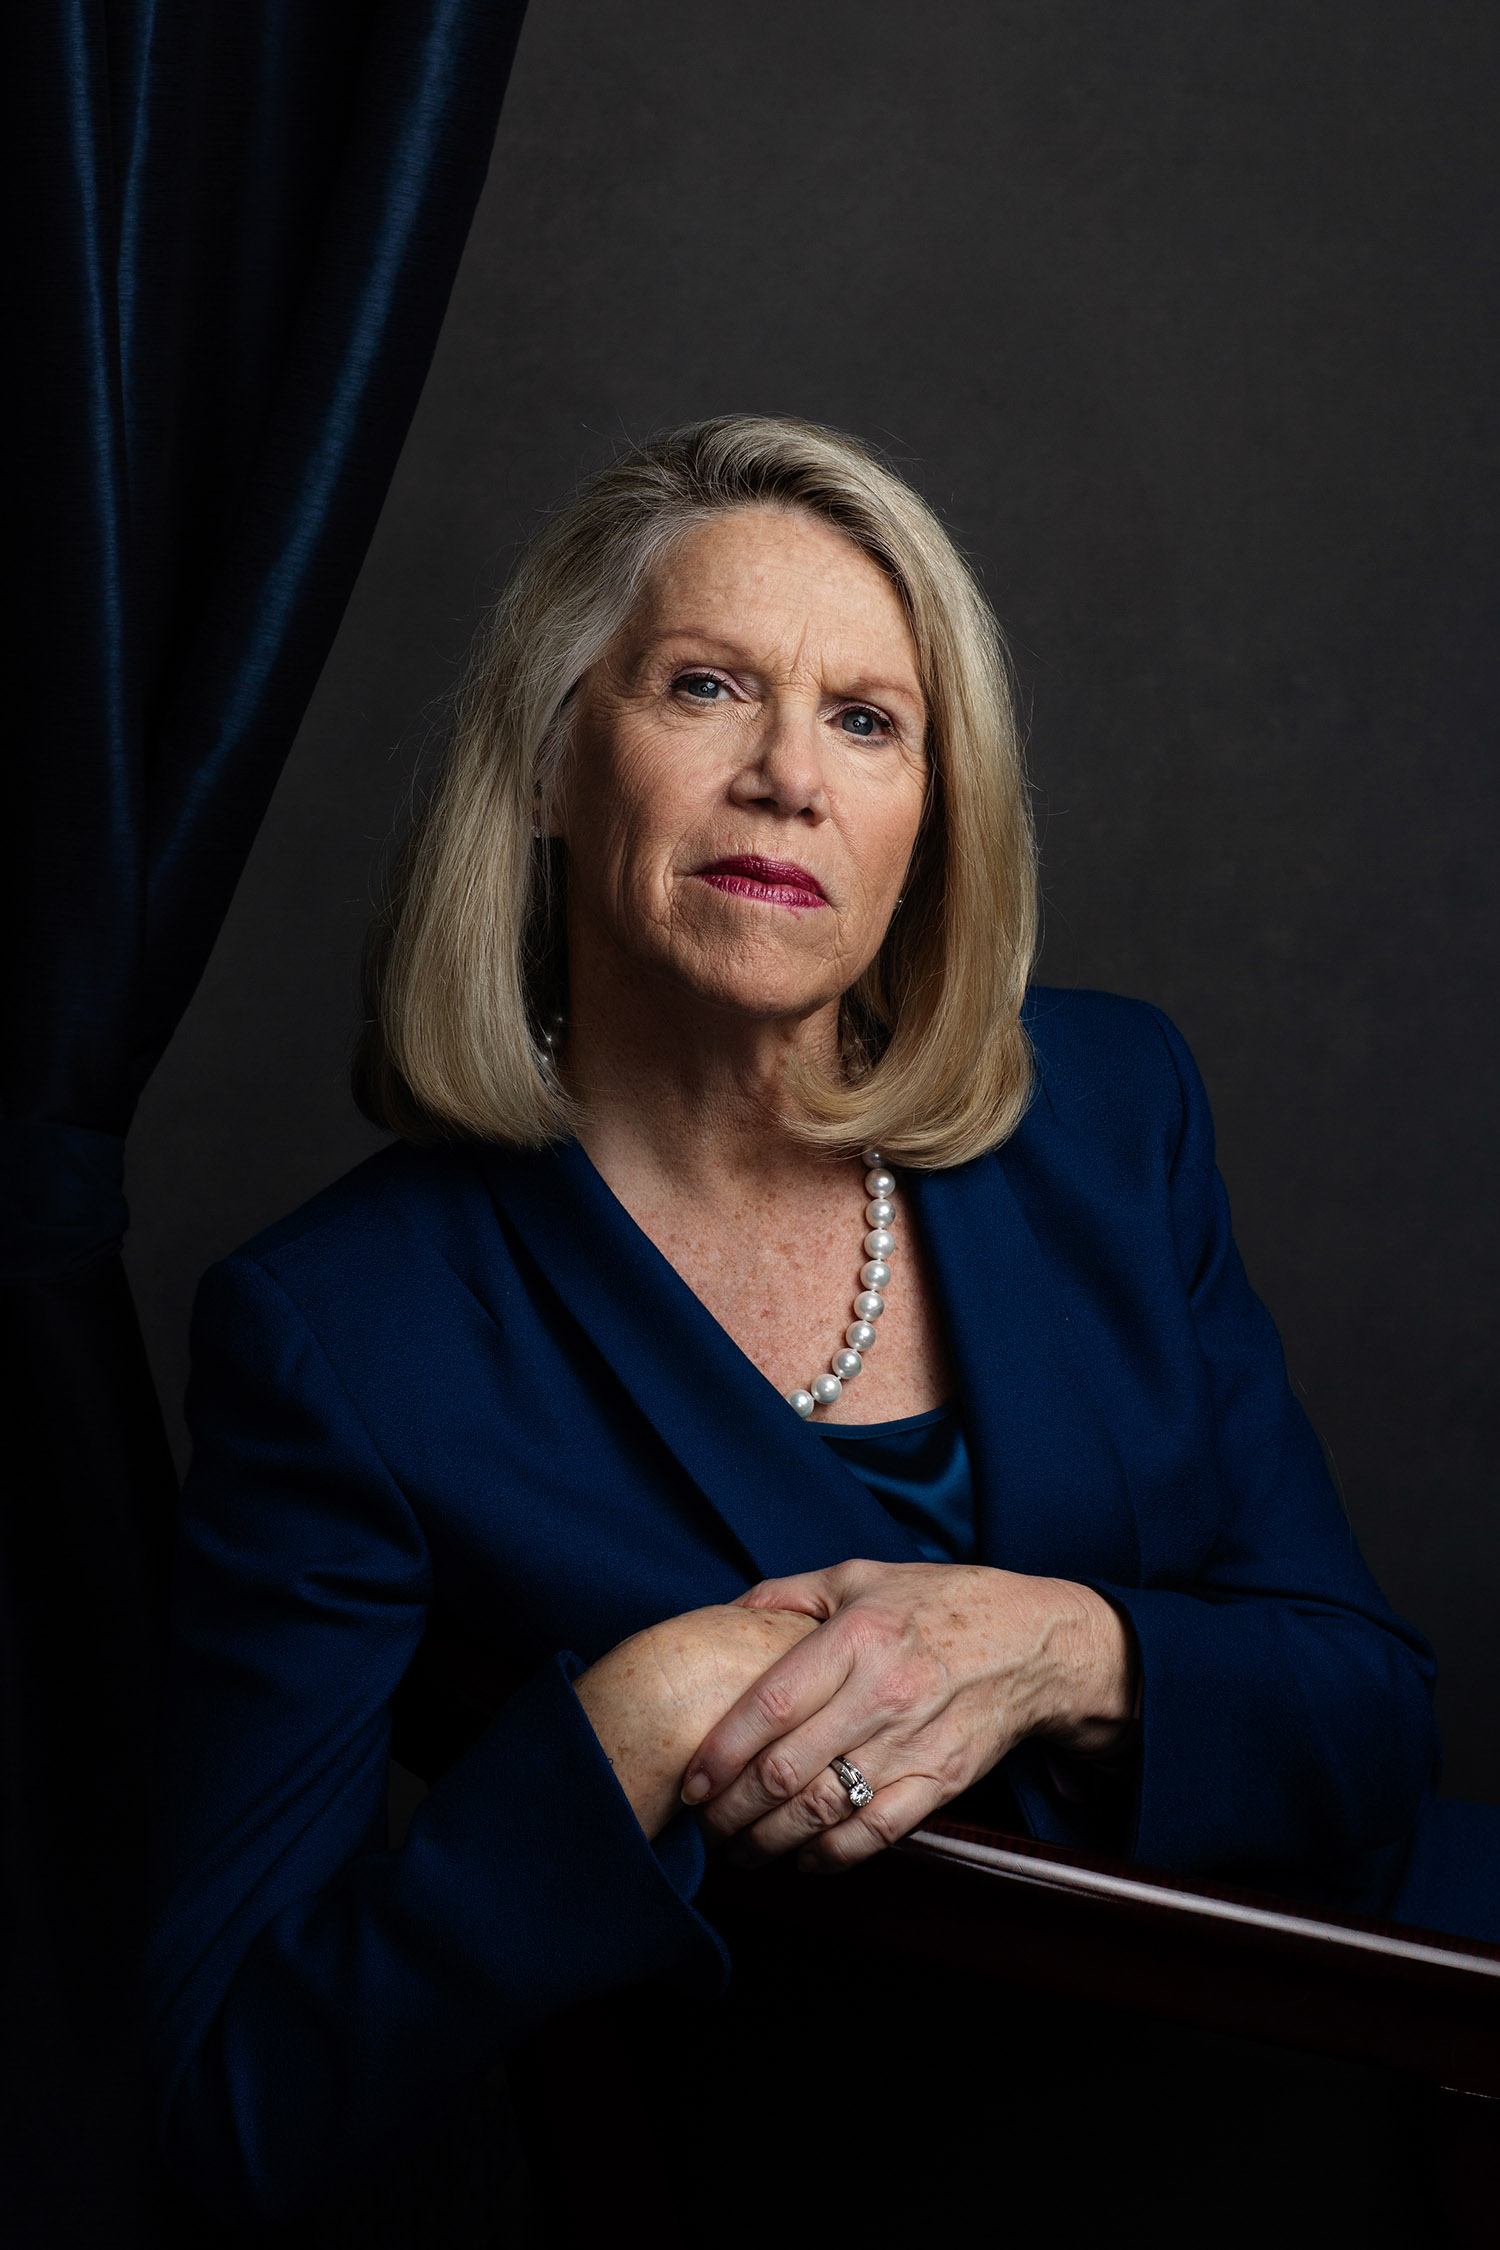  Carol Miller *****HOLD FOR WOMEN IN CONGRESS PROJECT****Carol Devine Miller is an American politician who is the representative in West Virginia's 3rd congressional district, serving since 2019. She is a member of the Republican Party.

Elizabeth D.